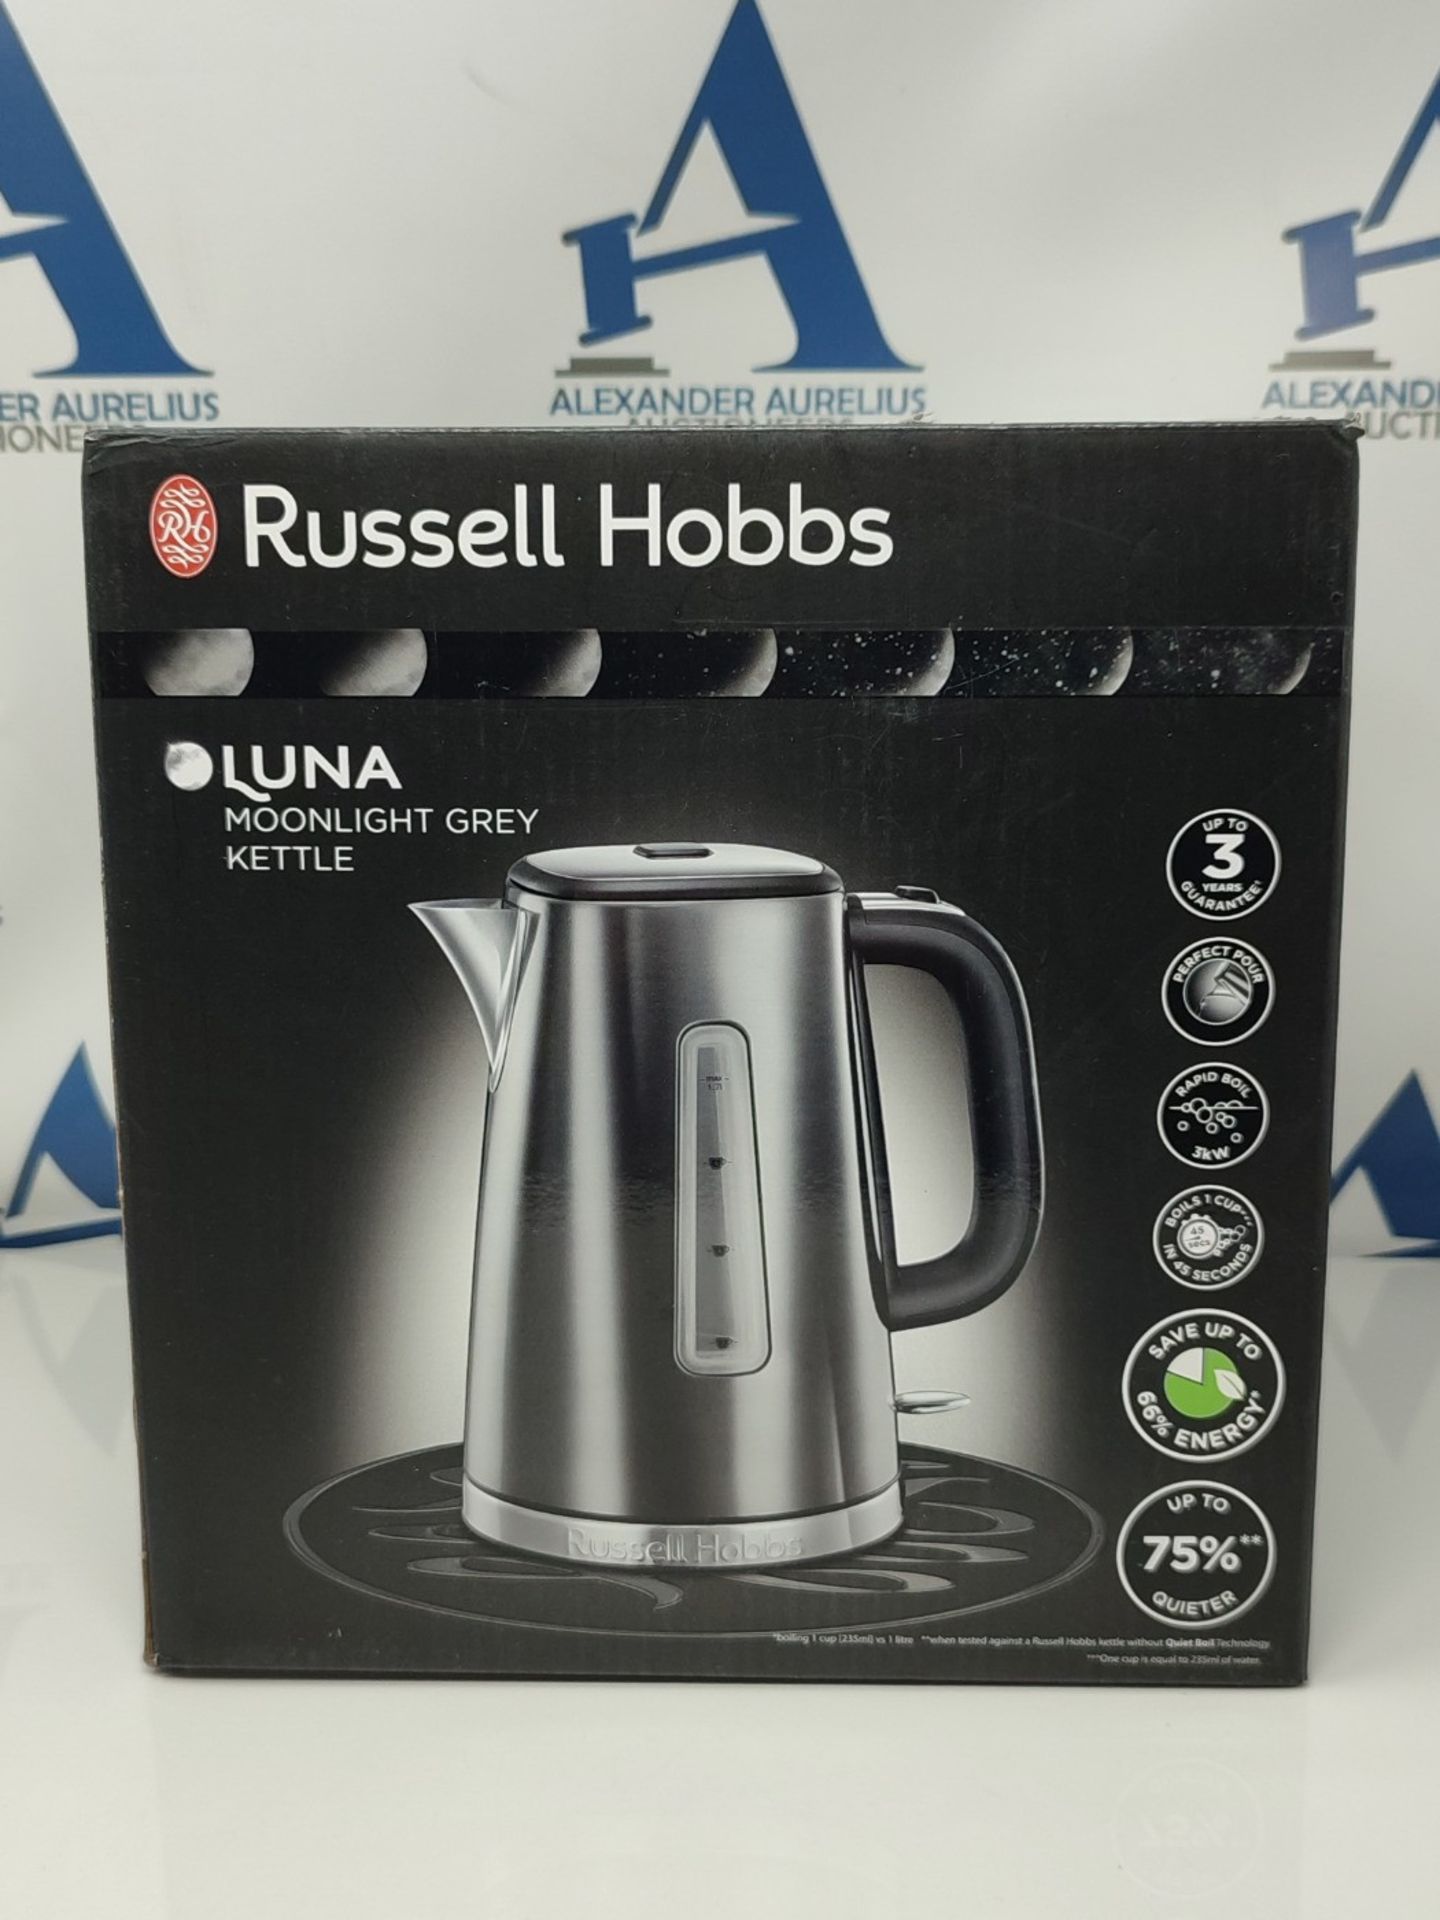 Russell Hobbs 23211 Luna Quiet Boil Electric Kettle, Stainless Steel, 3000 W, 1.7 Litr - Image 2 of 3